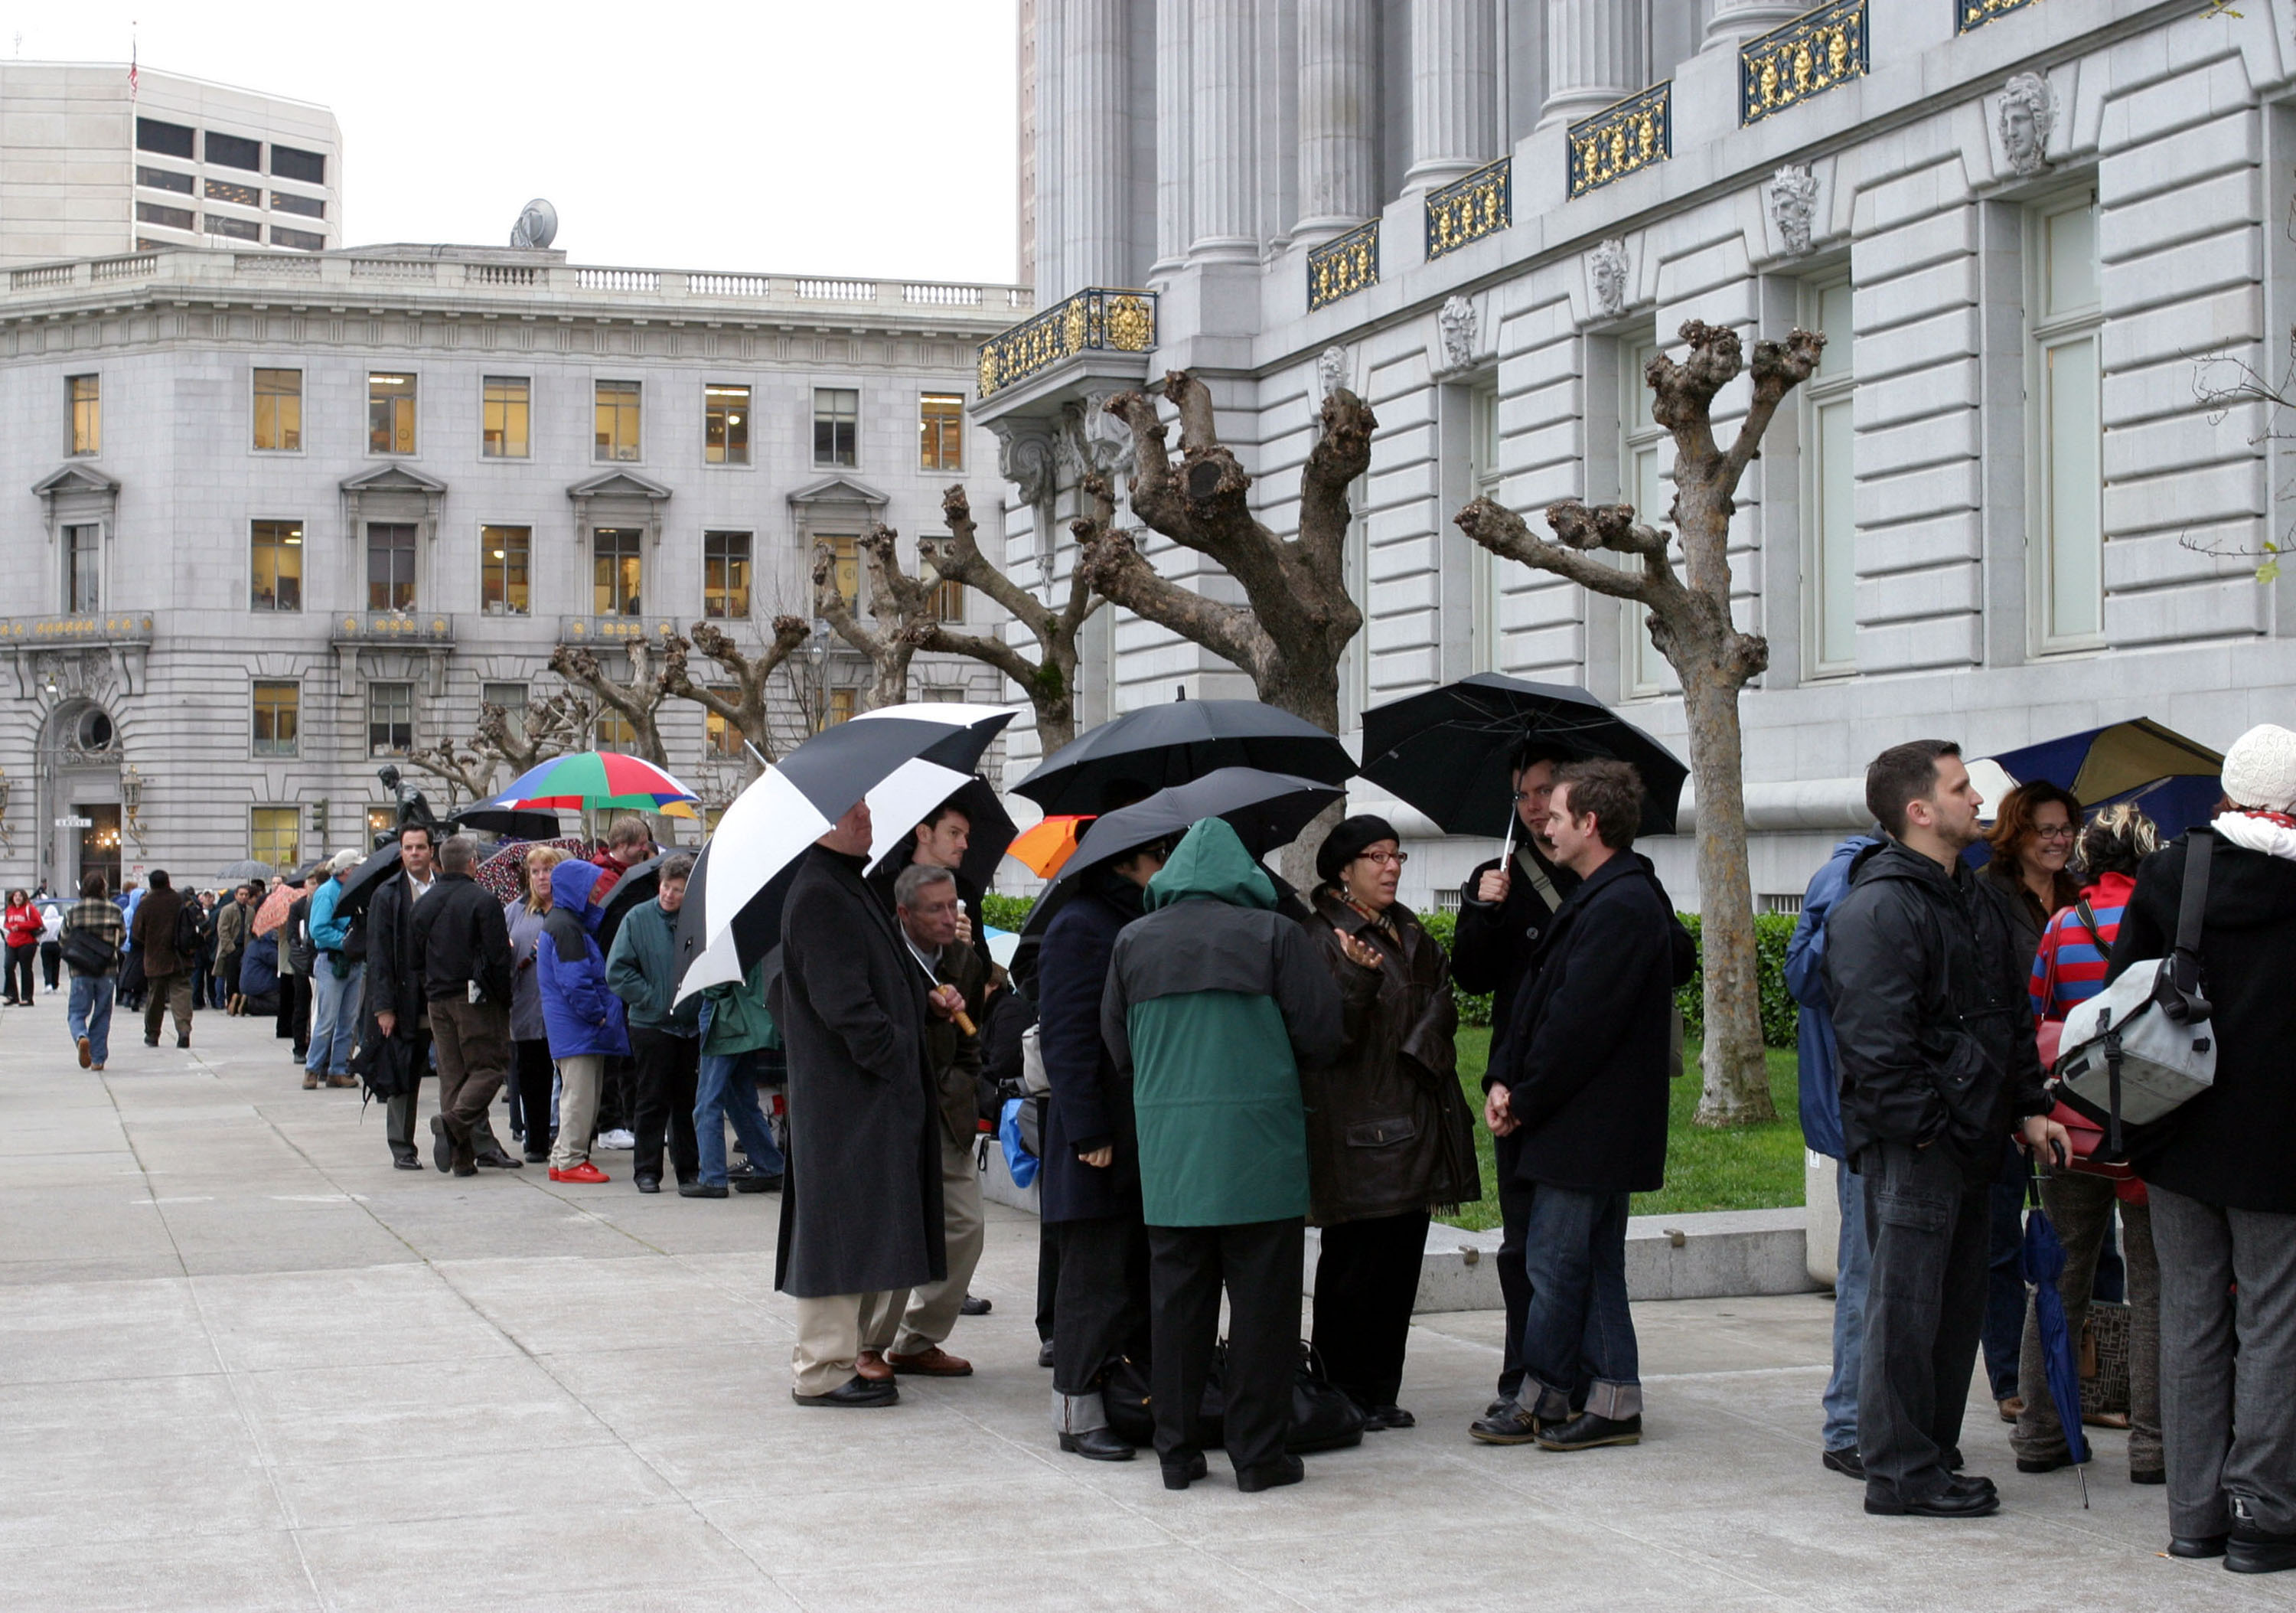 A line of people, many wearing rain coats and holding umbrellas, stands outside of San Francisco City Hall. The line stretches down the block.